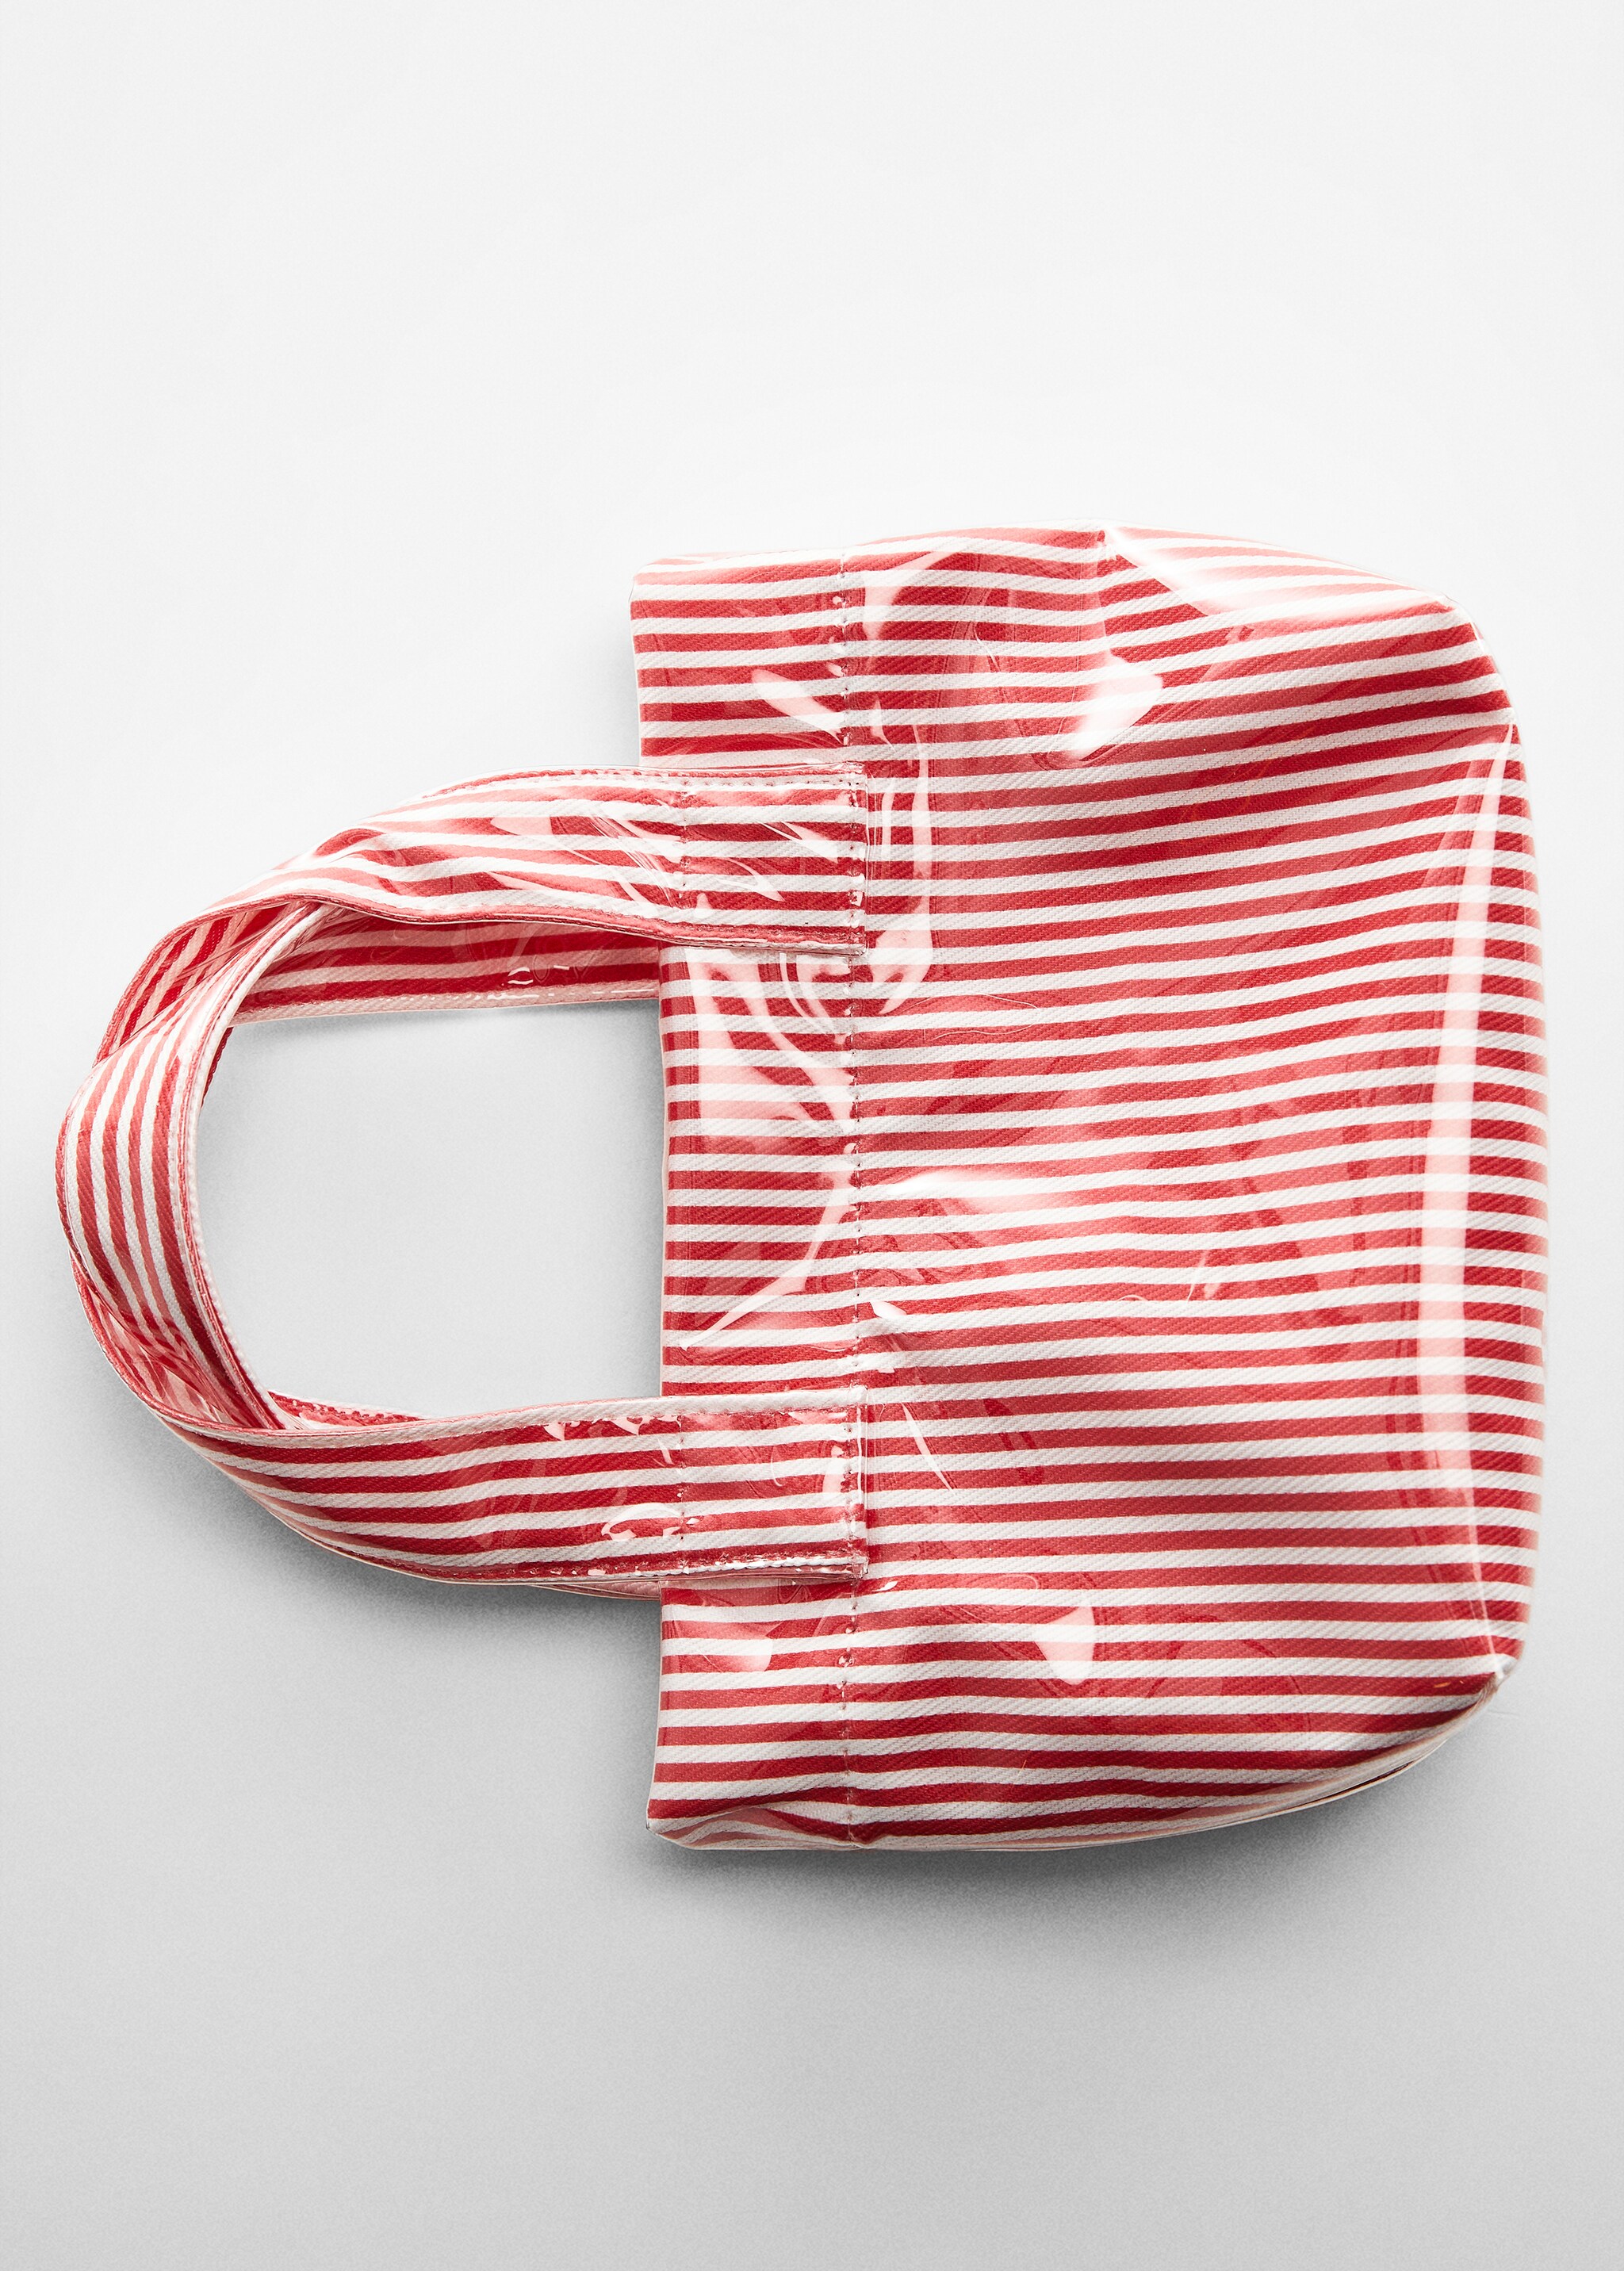 Striped handbag - Details of the article 5